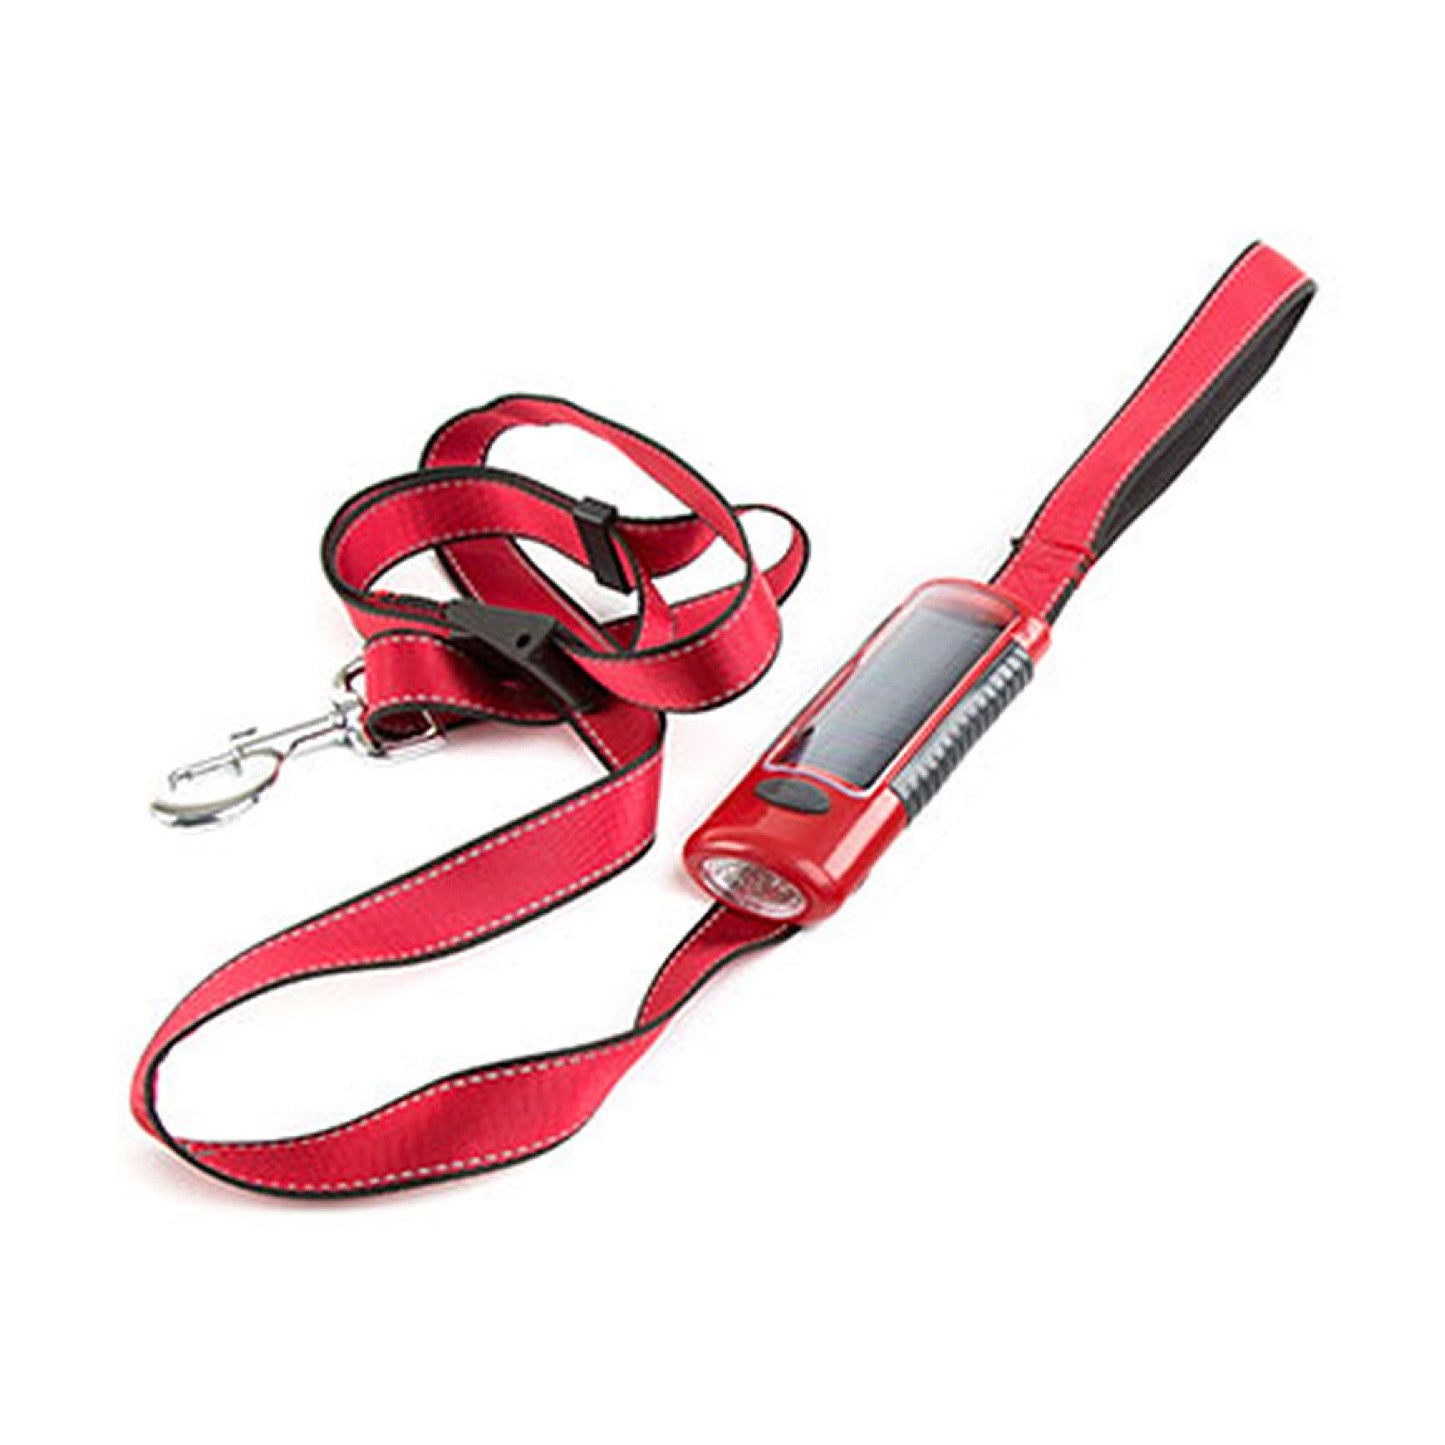 Keep Your Dog Safe and Visible with a LED Leash